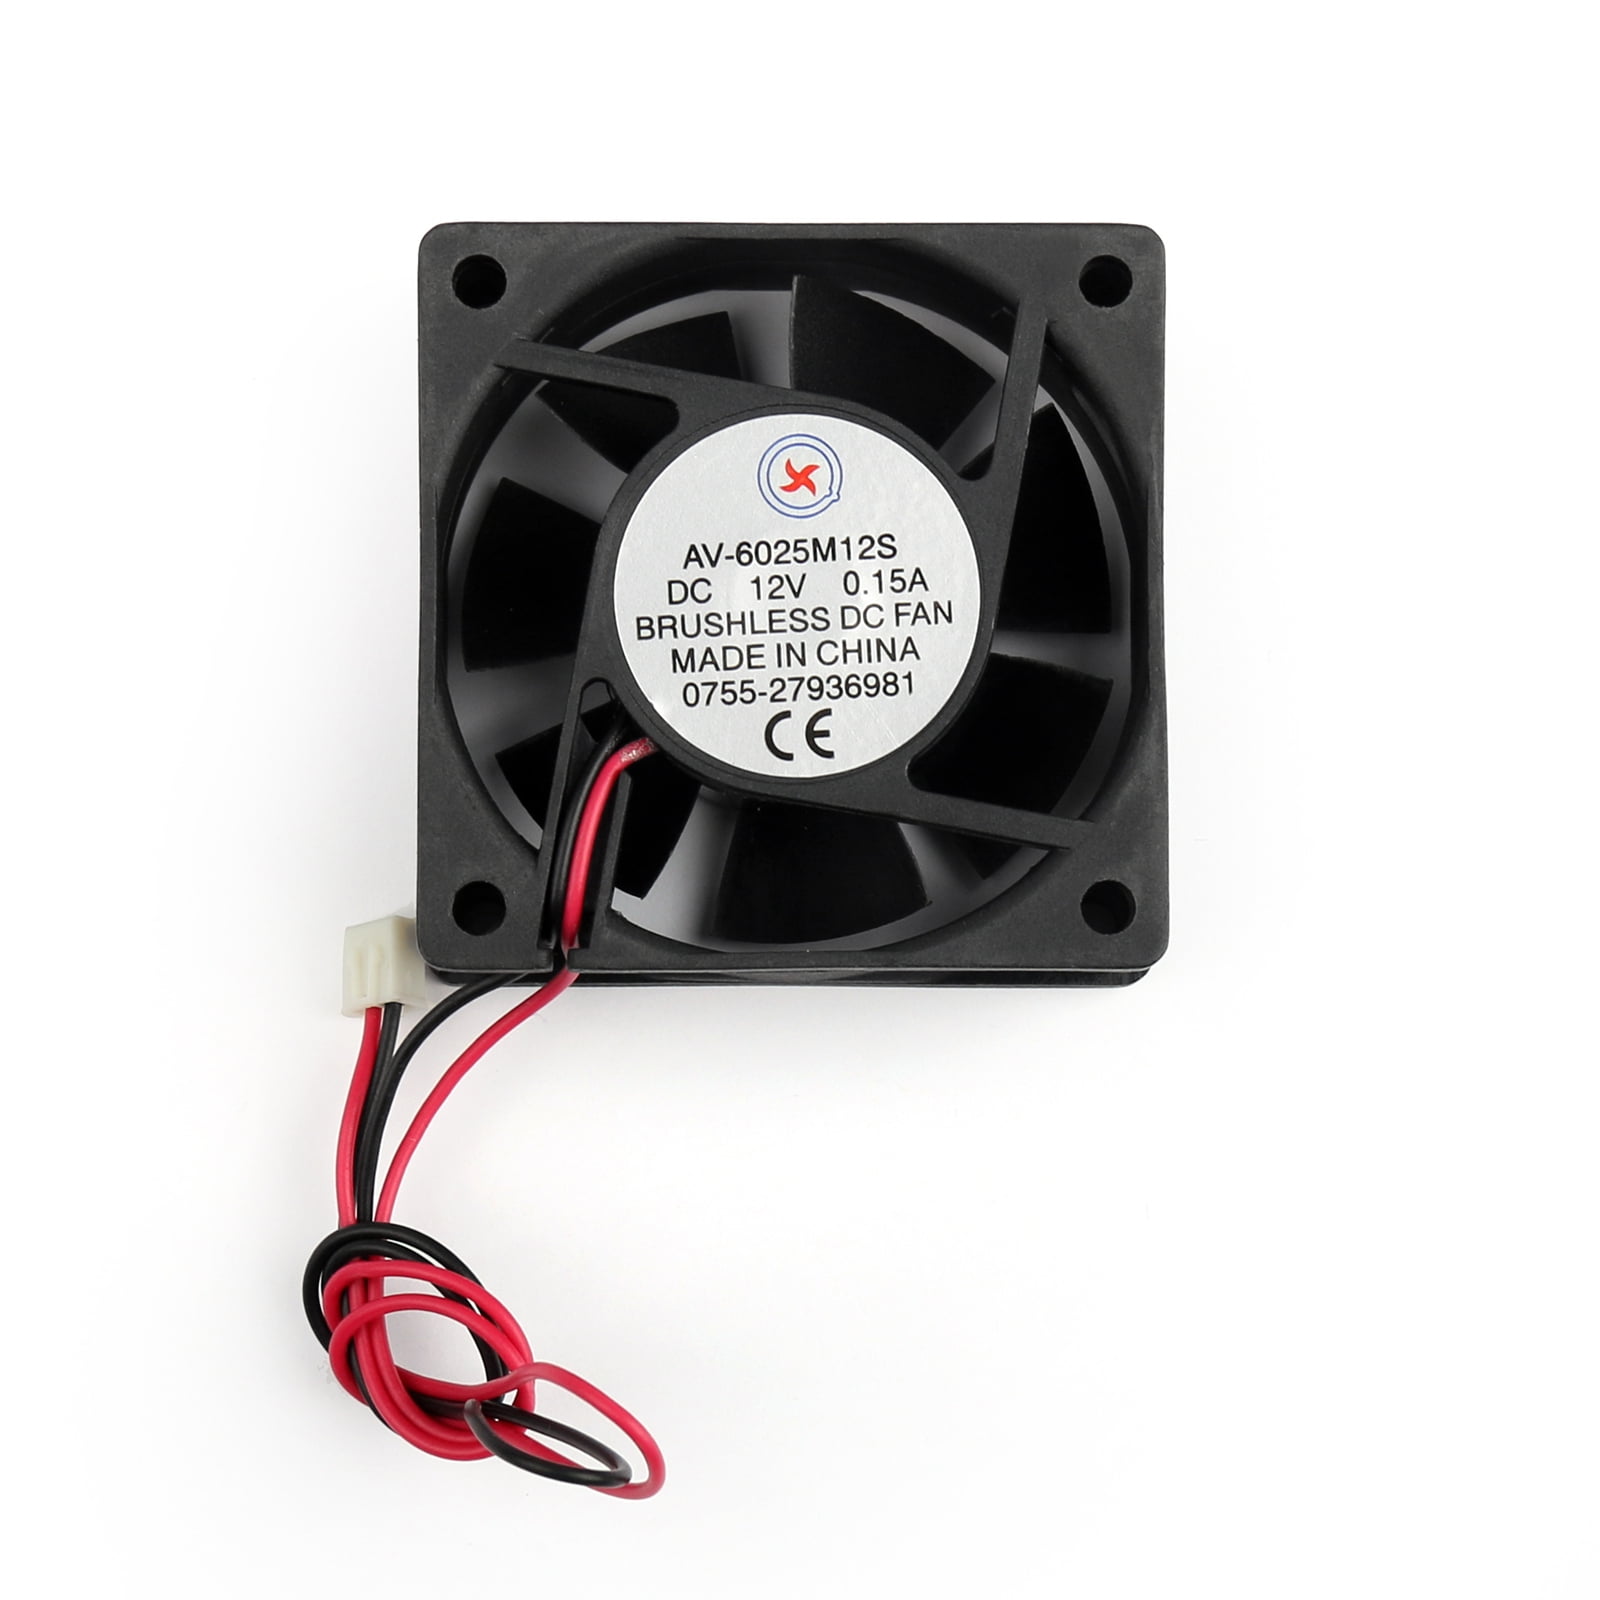 DC Brushless Cooling PC Computer Fan 12V 0.16A 8015s 80x80x15mm 3Pin Wire Fan US 